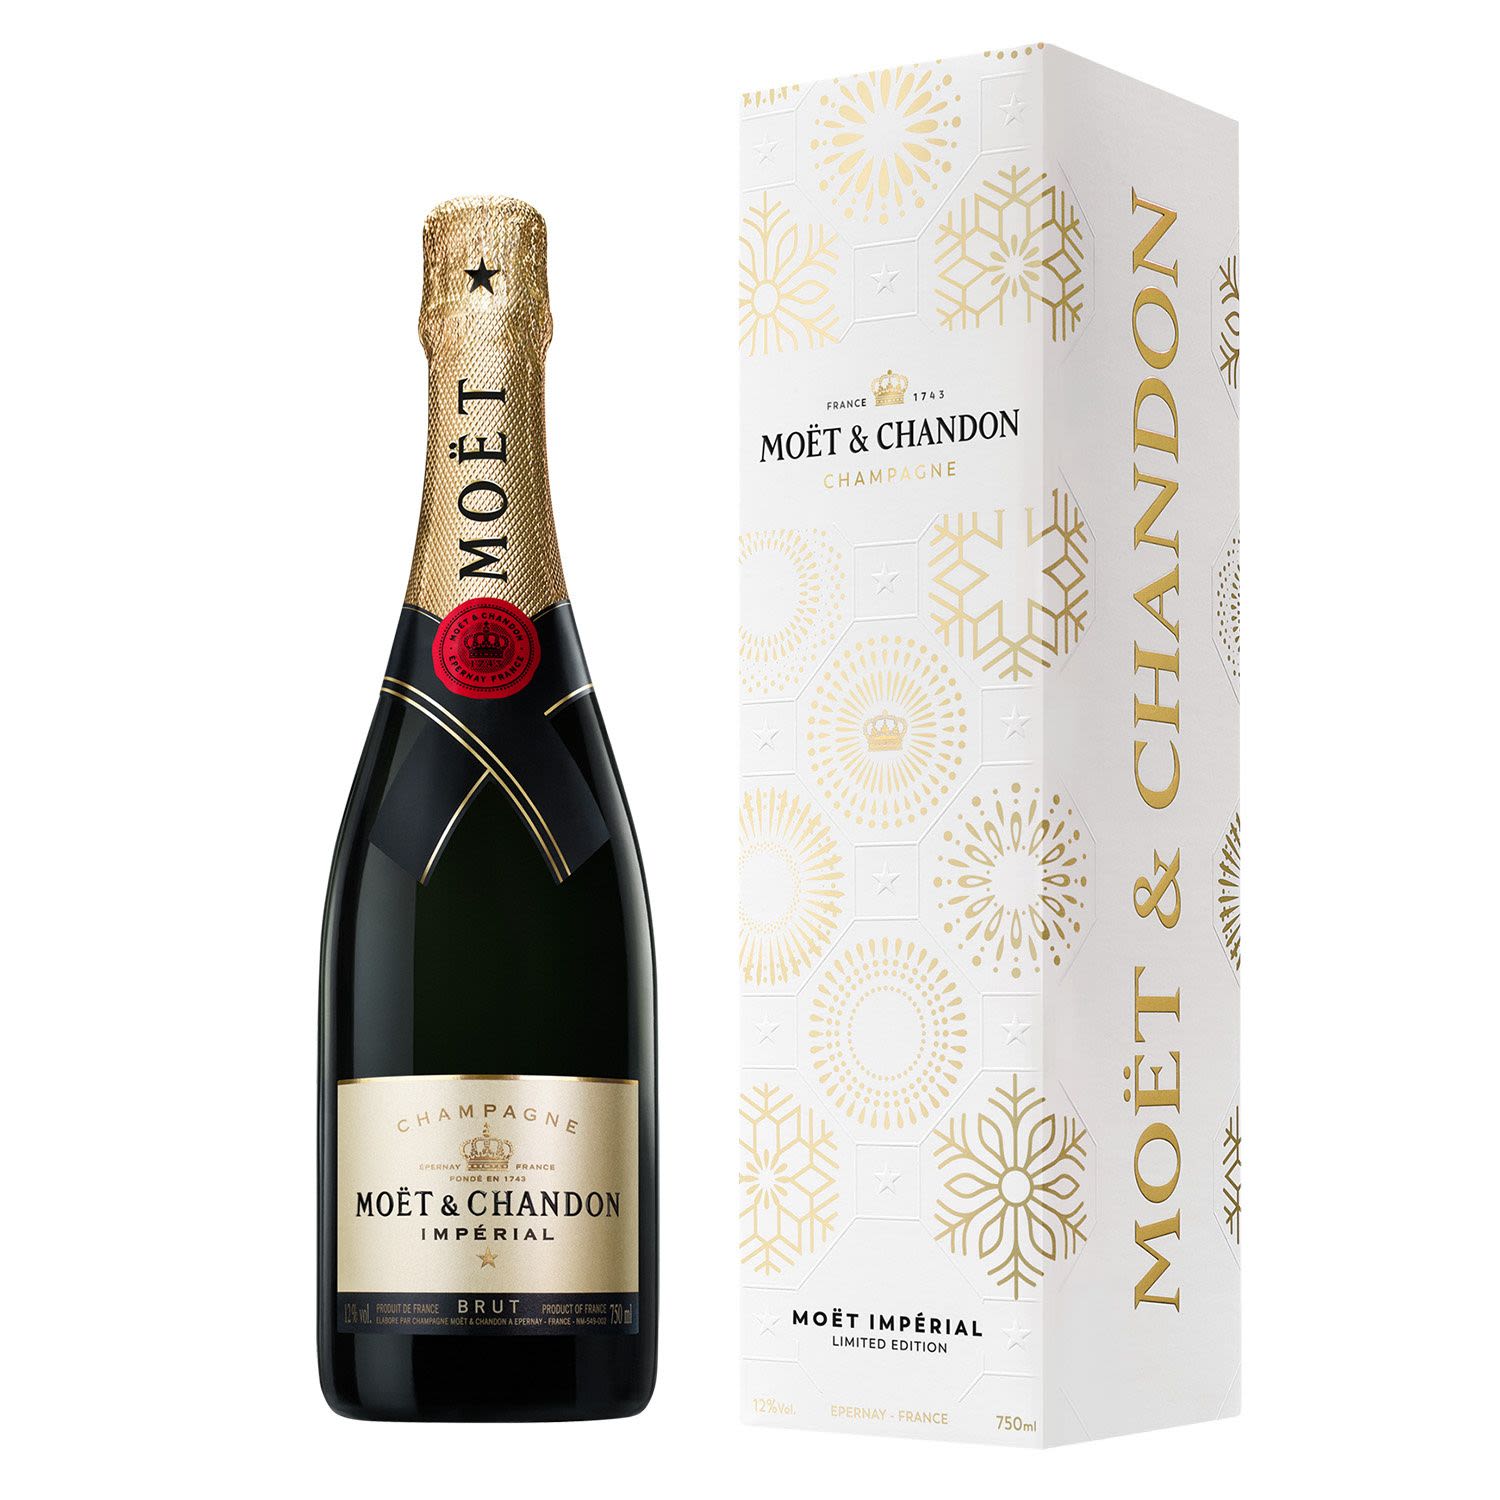 Moet & Chandon Brut Imperial NV 750mL Limited Edition Gift Box